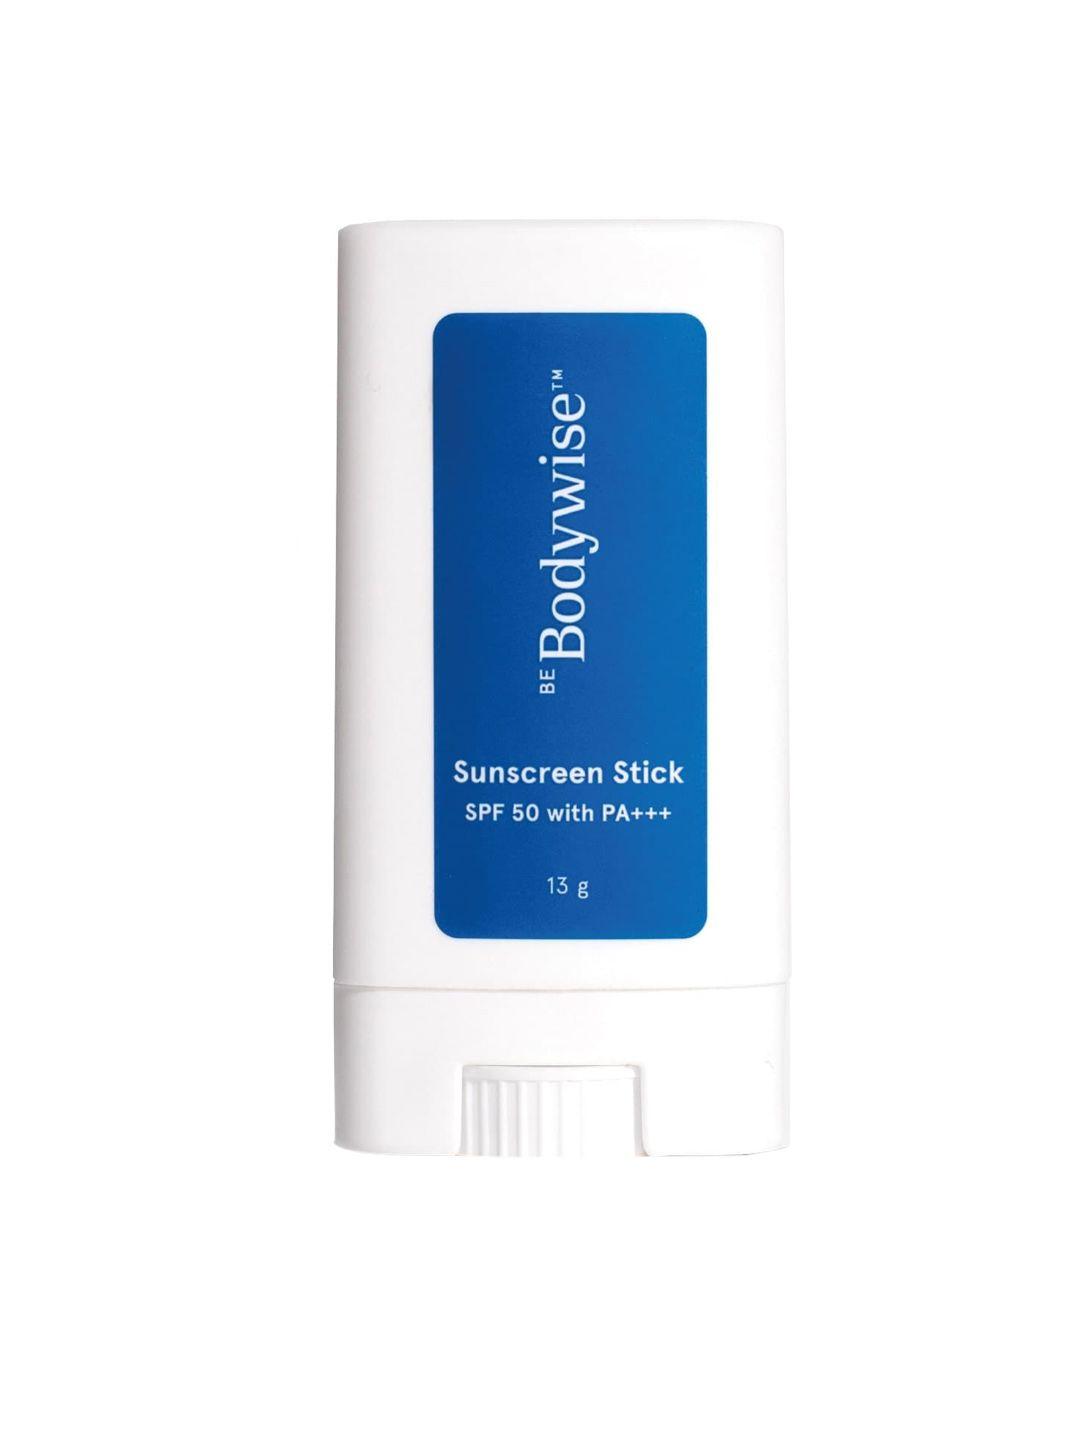 be bodywise spf 50 with pa+++ sunscreen stick - 13g